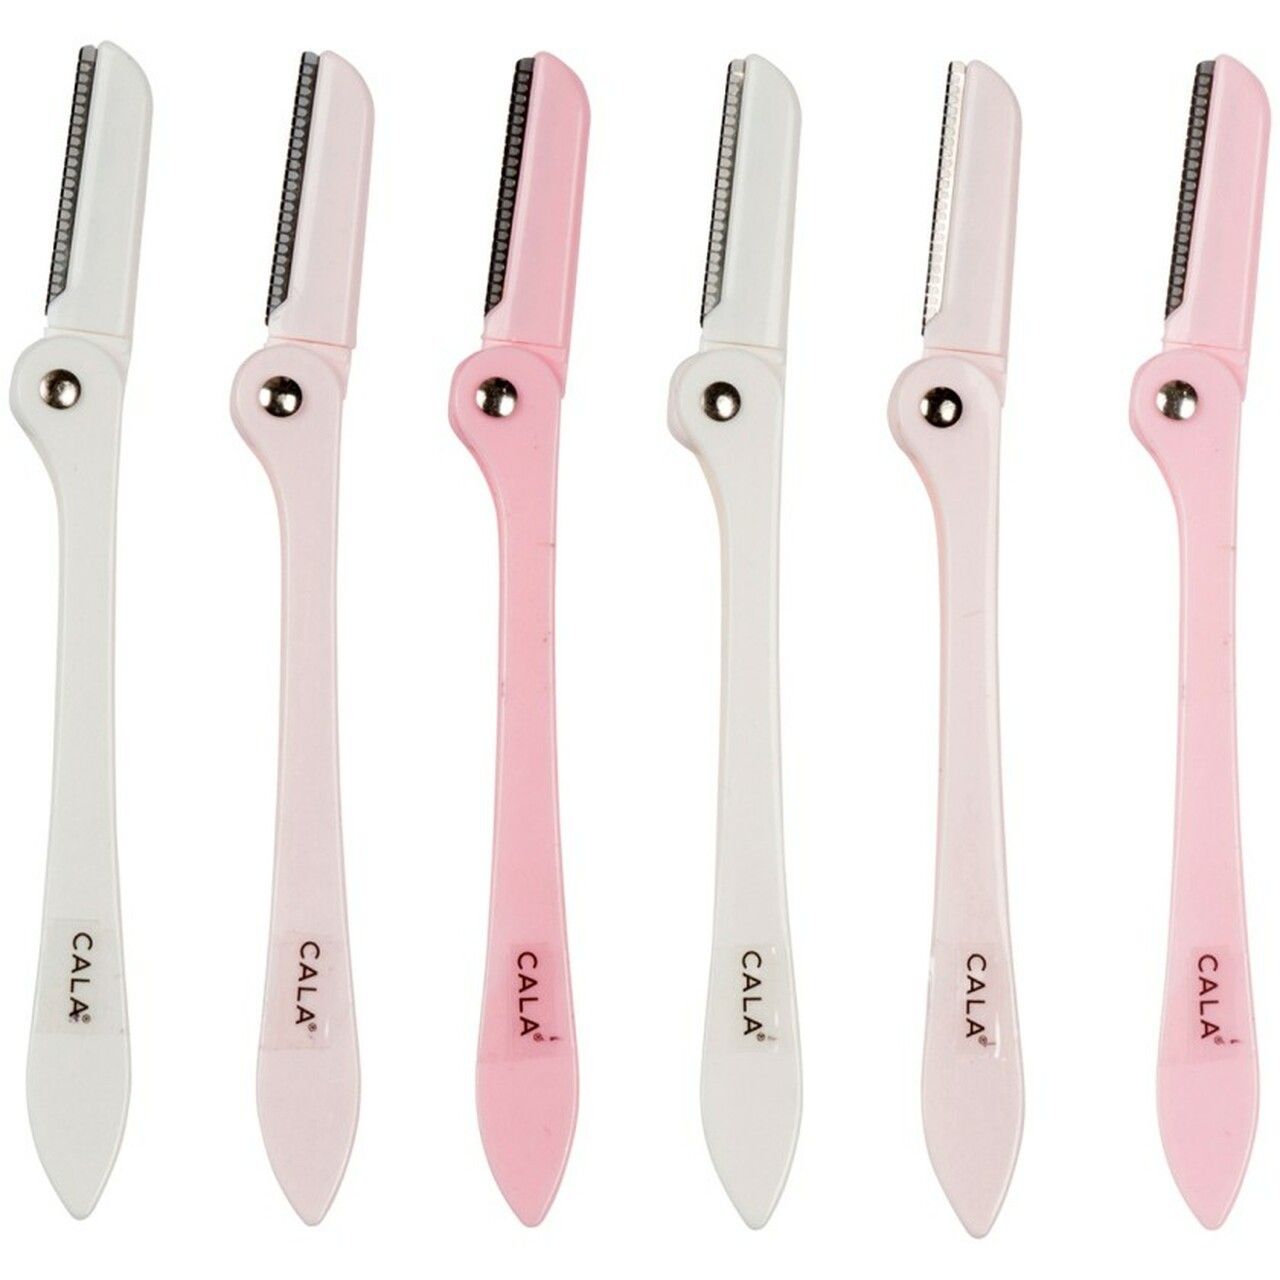 Here For The Brow - Brow Razor Set  (6 Pieces)